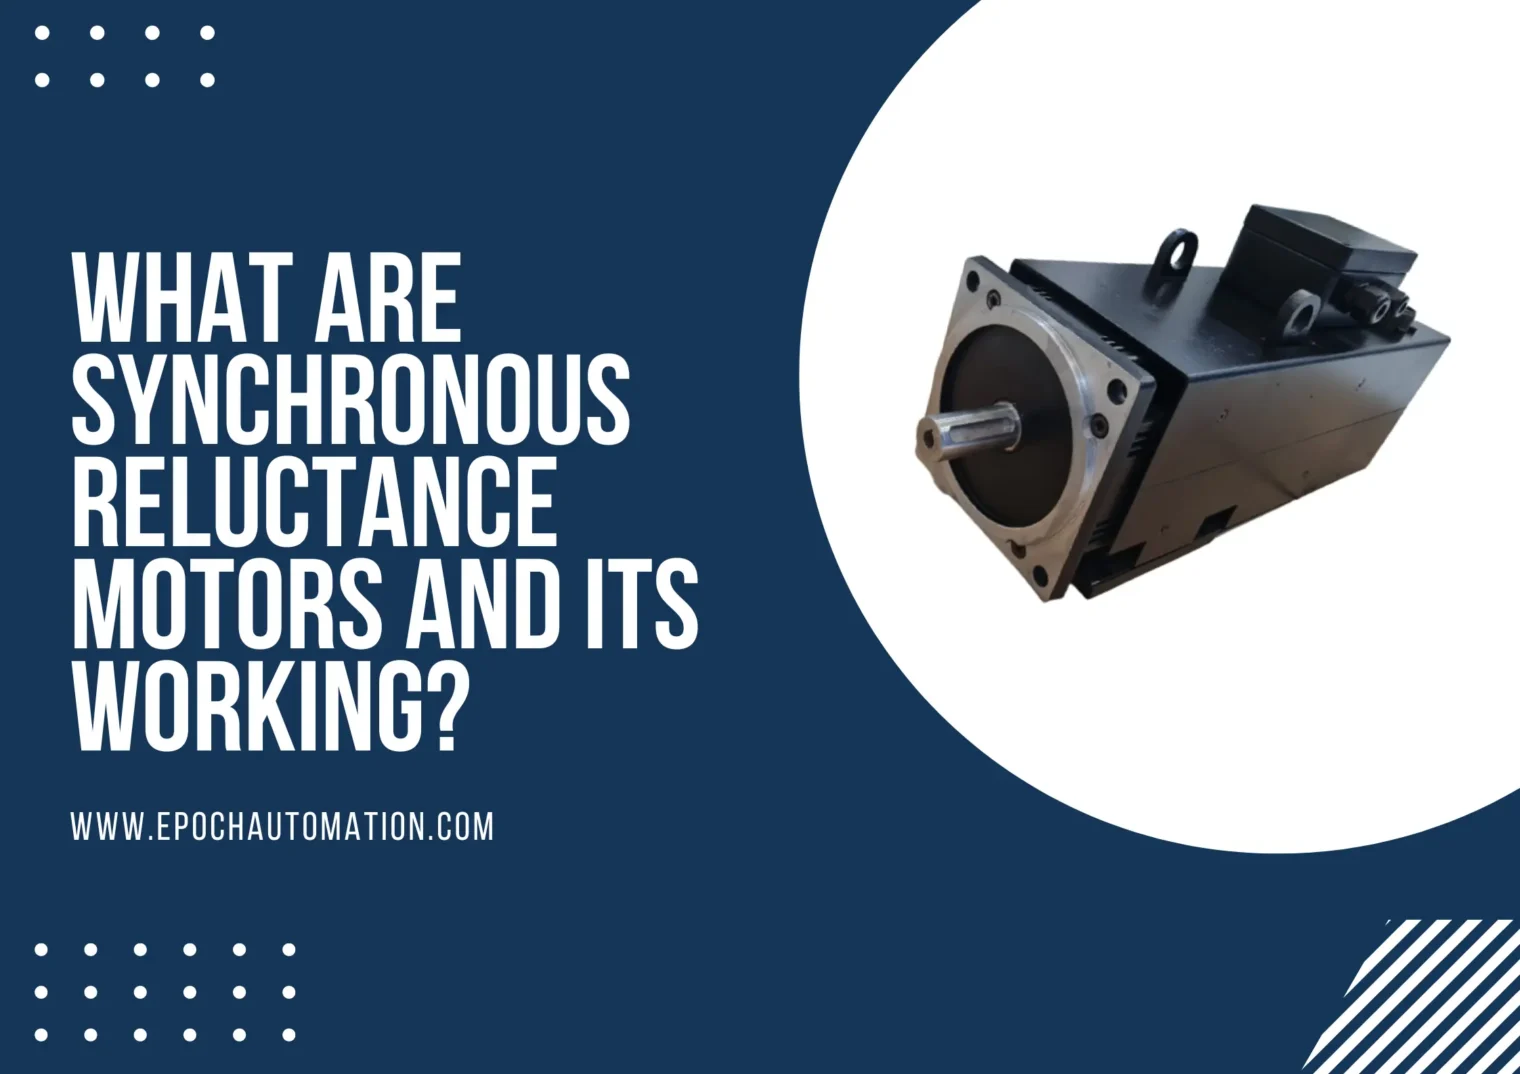 What are Synchronous Reluctance Motors and its working epoch automation